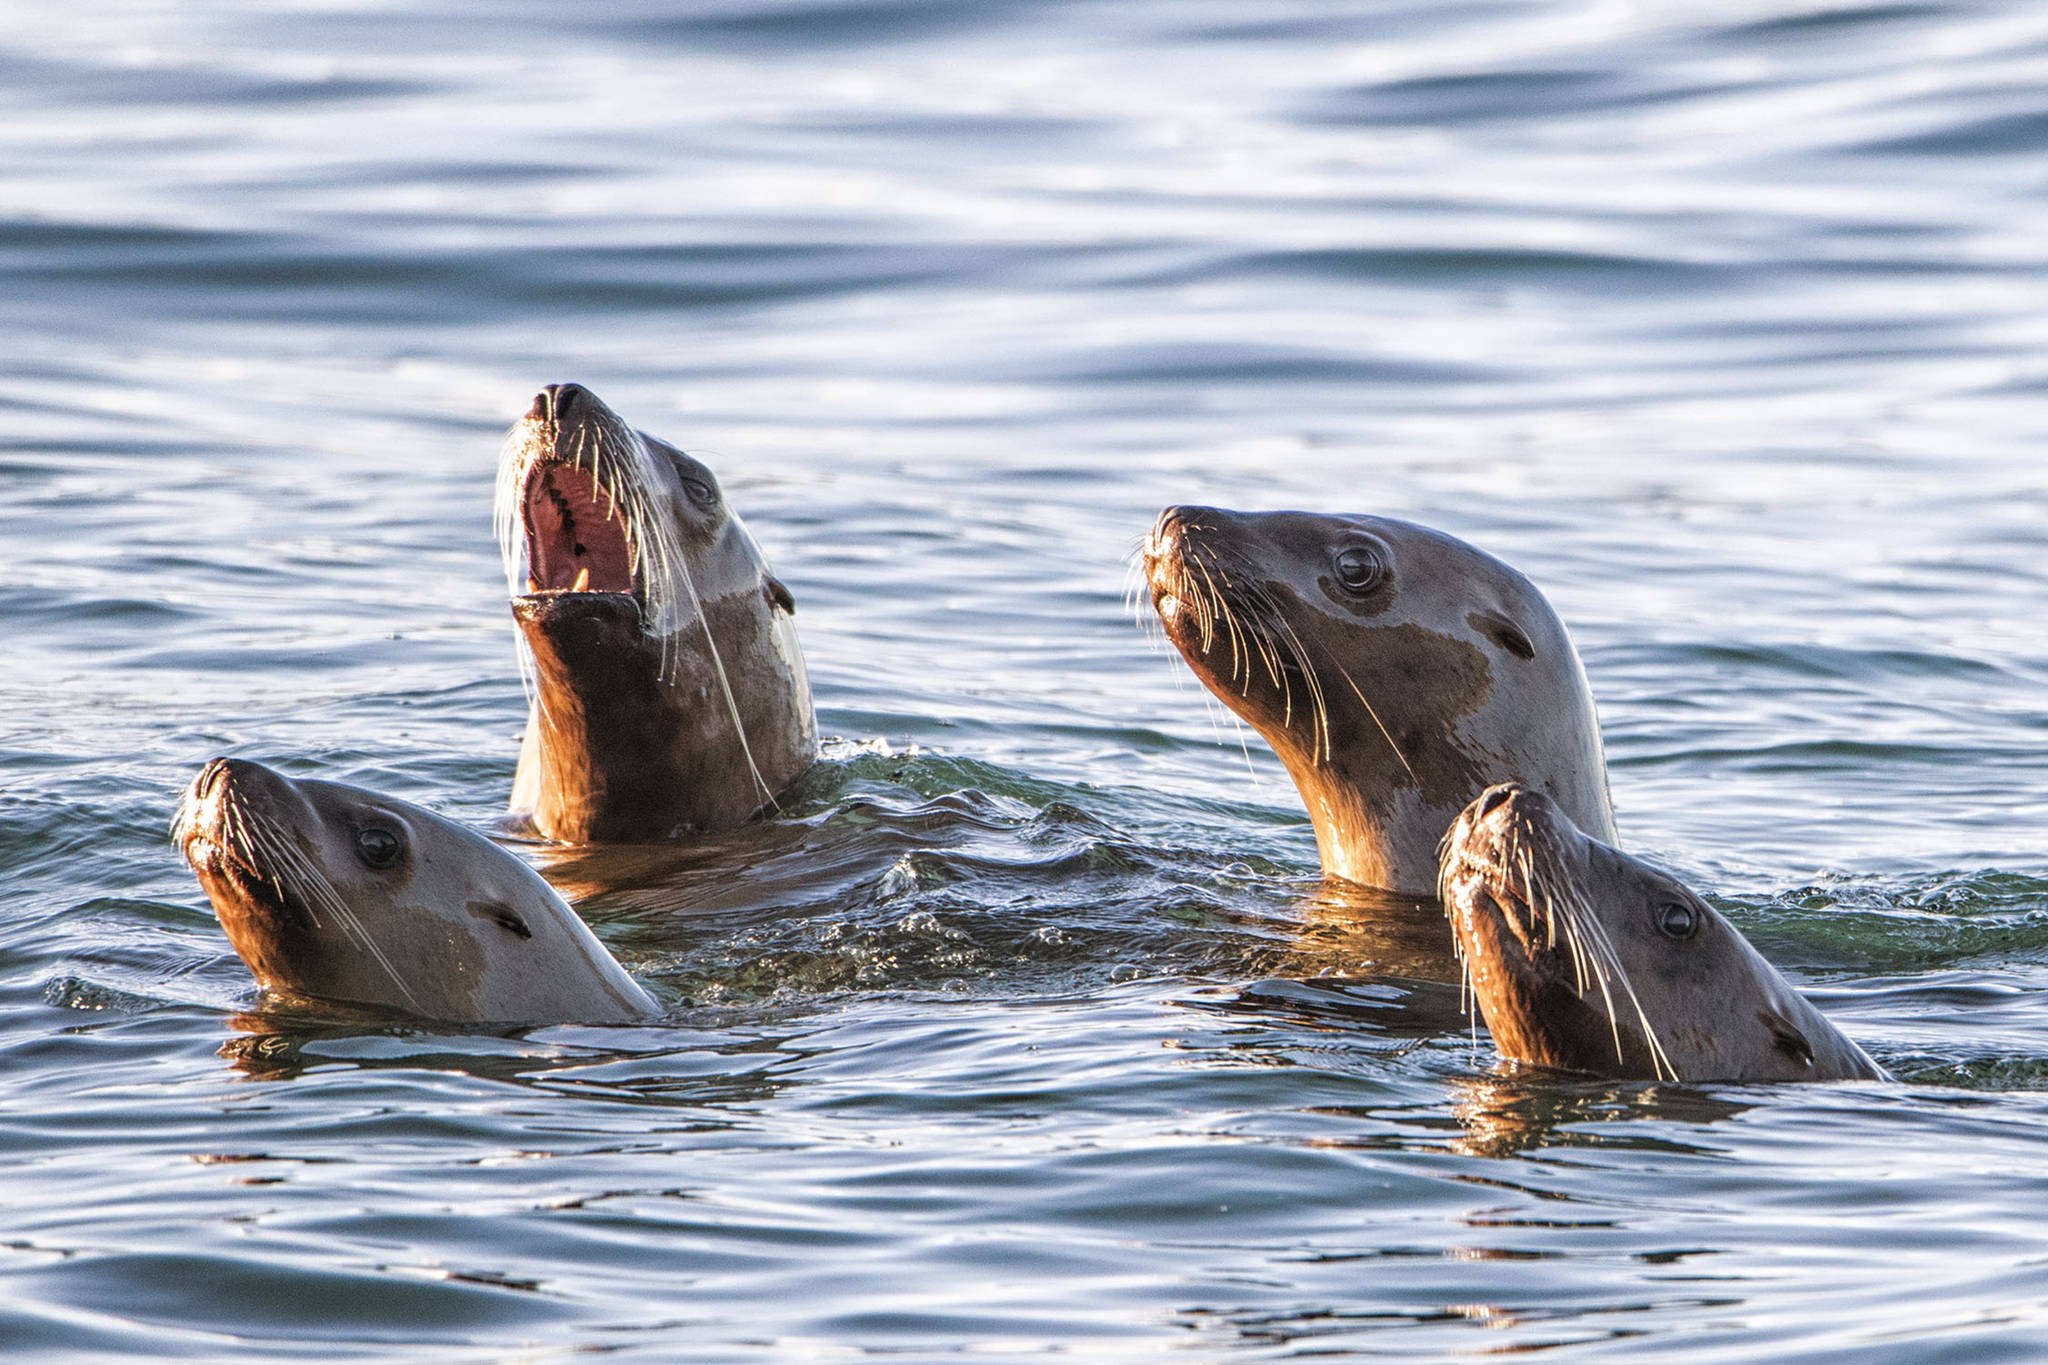 A quartet of Sea Lions off Point Louisa poke their heads above the water on Jan. 27. (Courtesy Photo / Kenneth Gill, gillfoto)